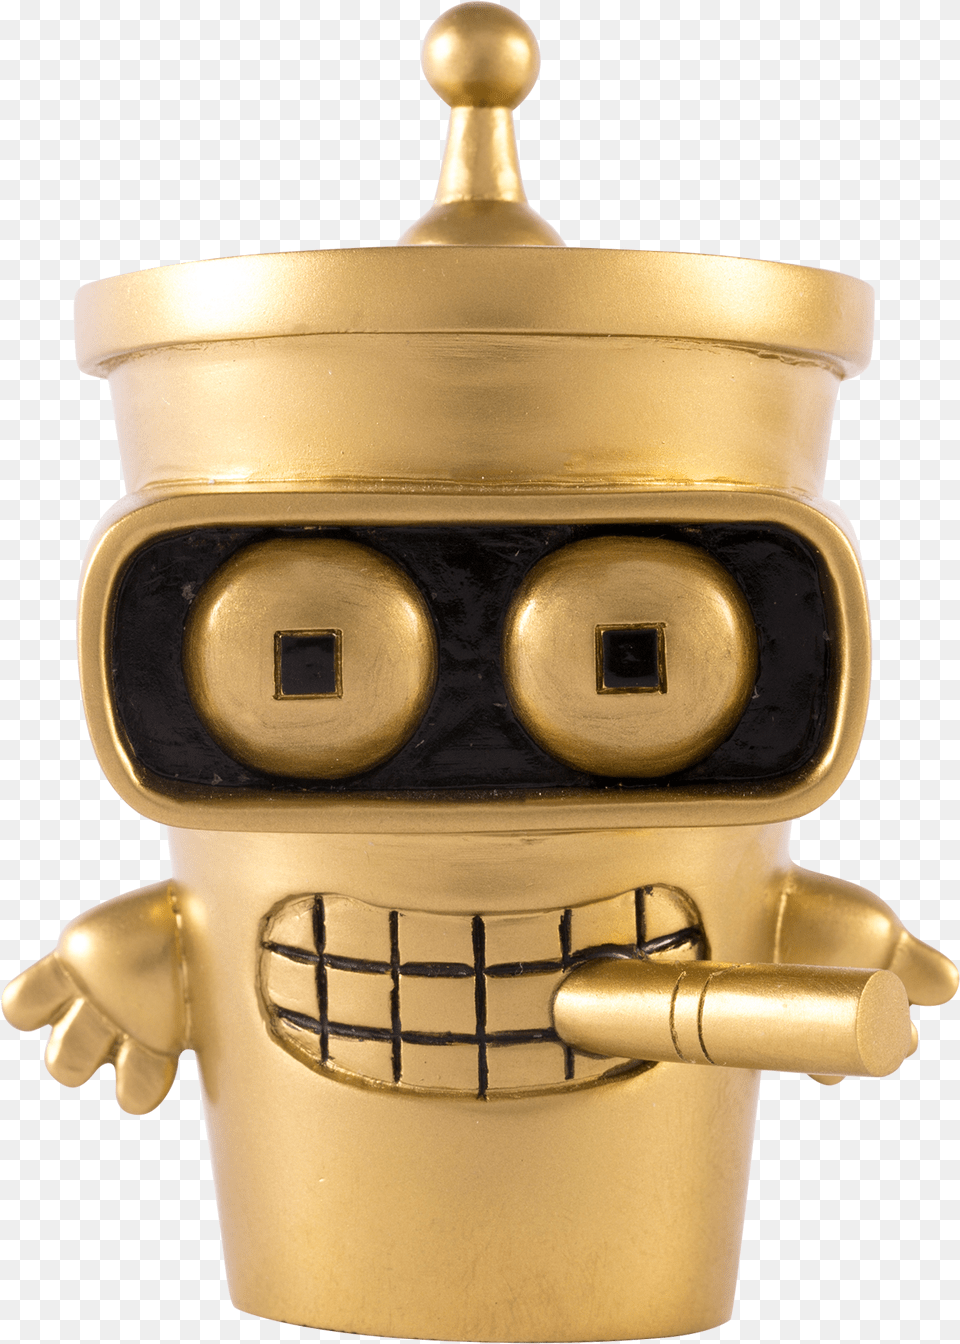 Toy, Nutcracker, Fire Hydrant, Hydrant Png Image